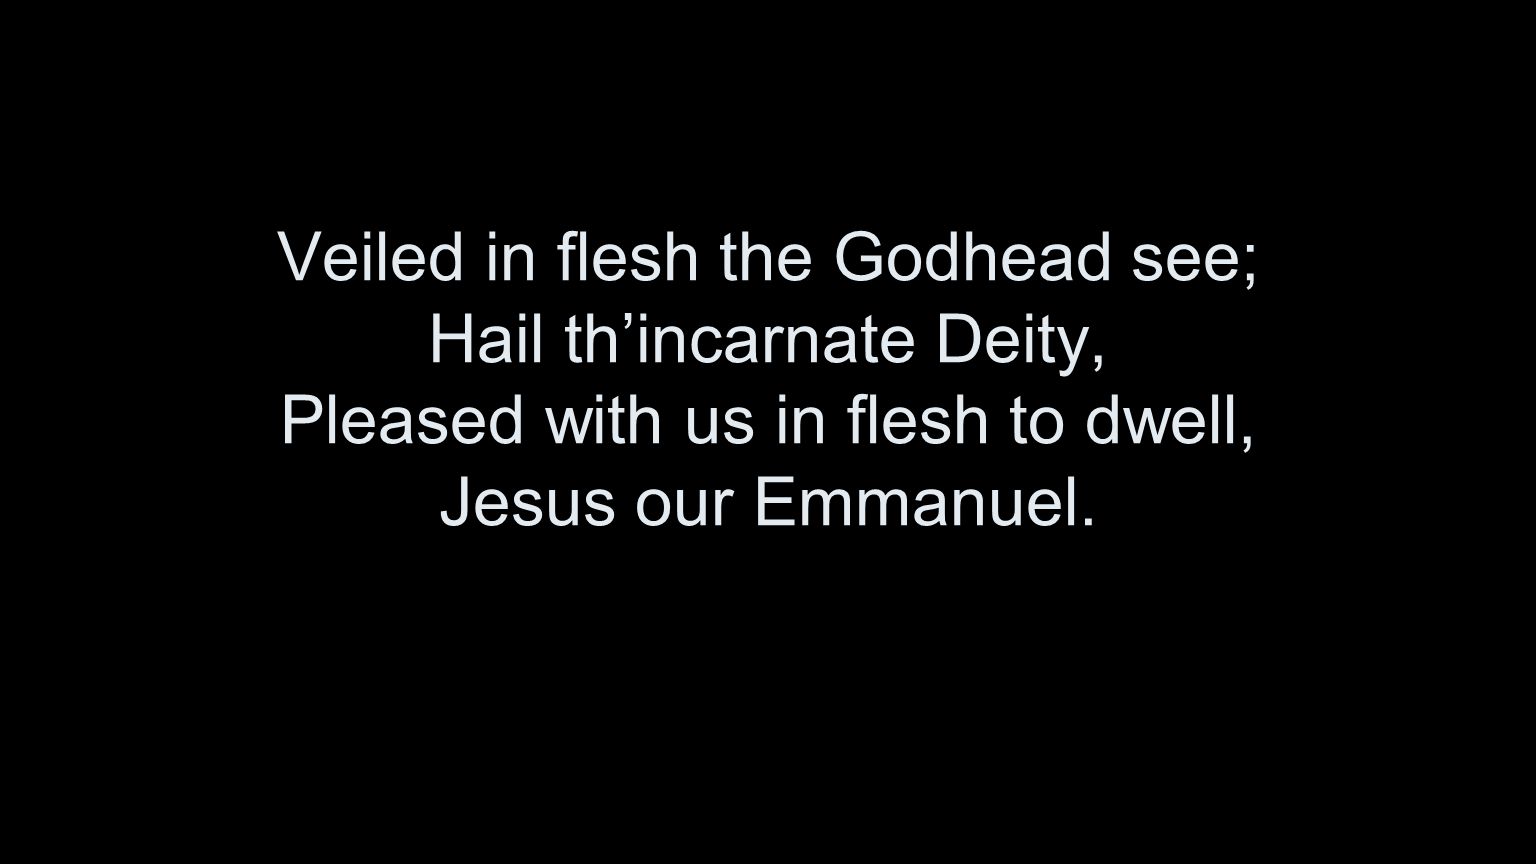 Veiled in flesh the Godhead see; Hail th’incarnate Deity, Pleased with us in flesh to dwell, Jesus our Emmanuel.